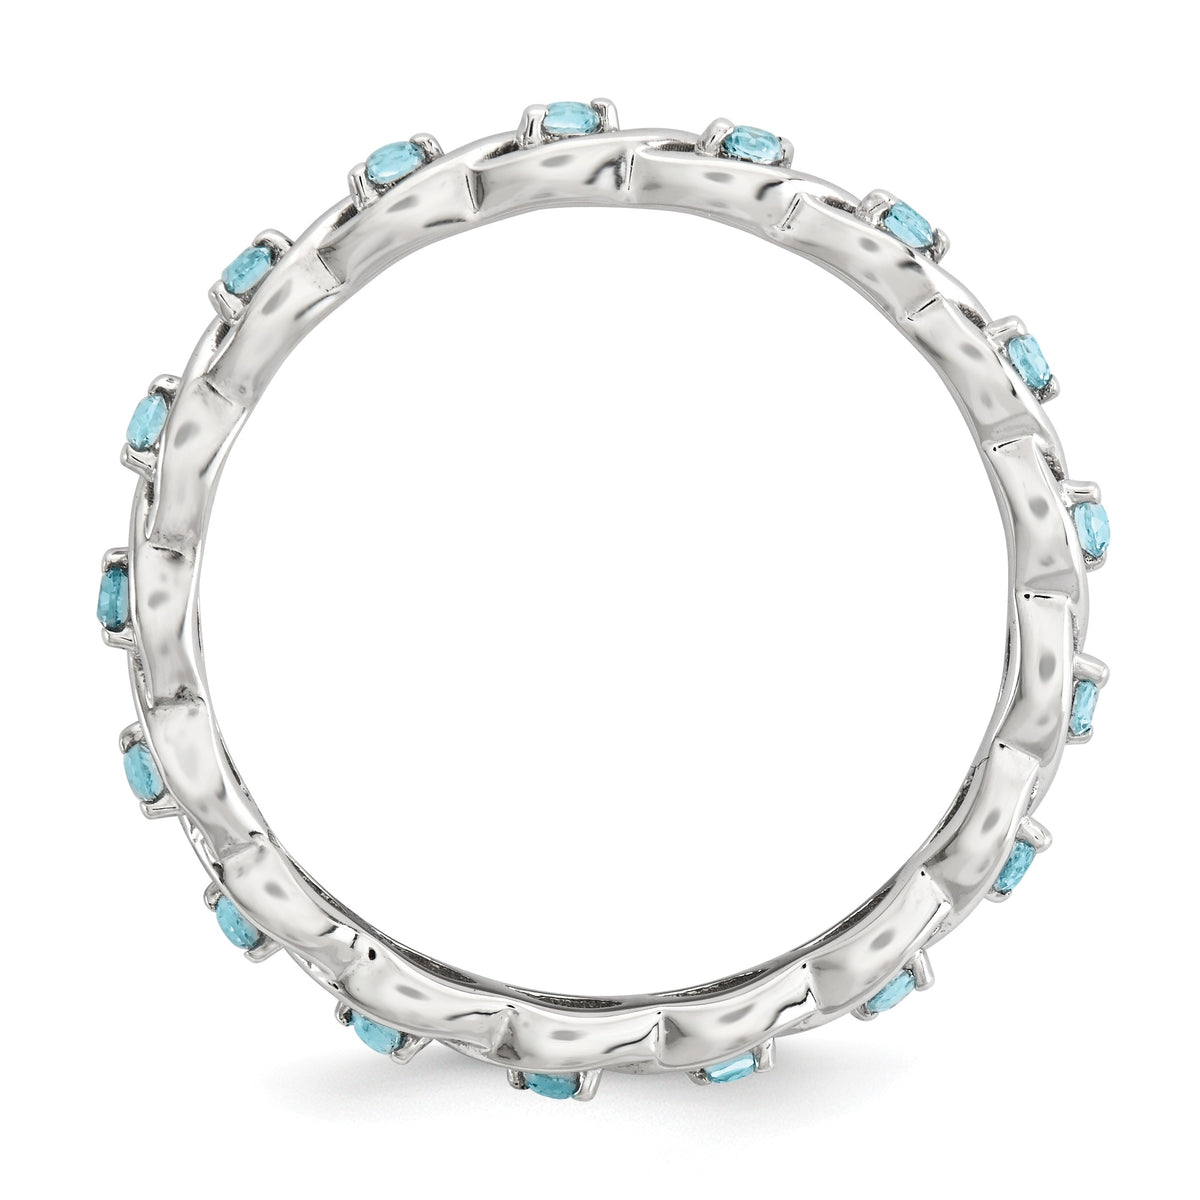 Alternate view of the 2.5mm Rhodium Plated Sterling Silver Stackable Blue Topaz Twist Band by The Black Bow Jewelry Co.